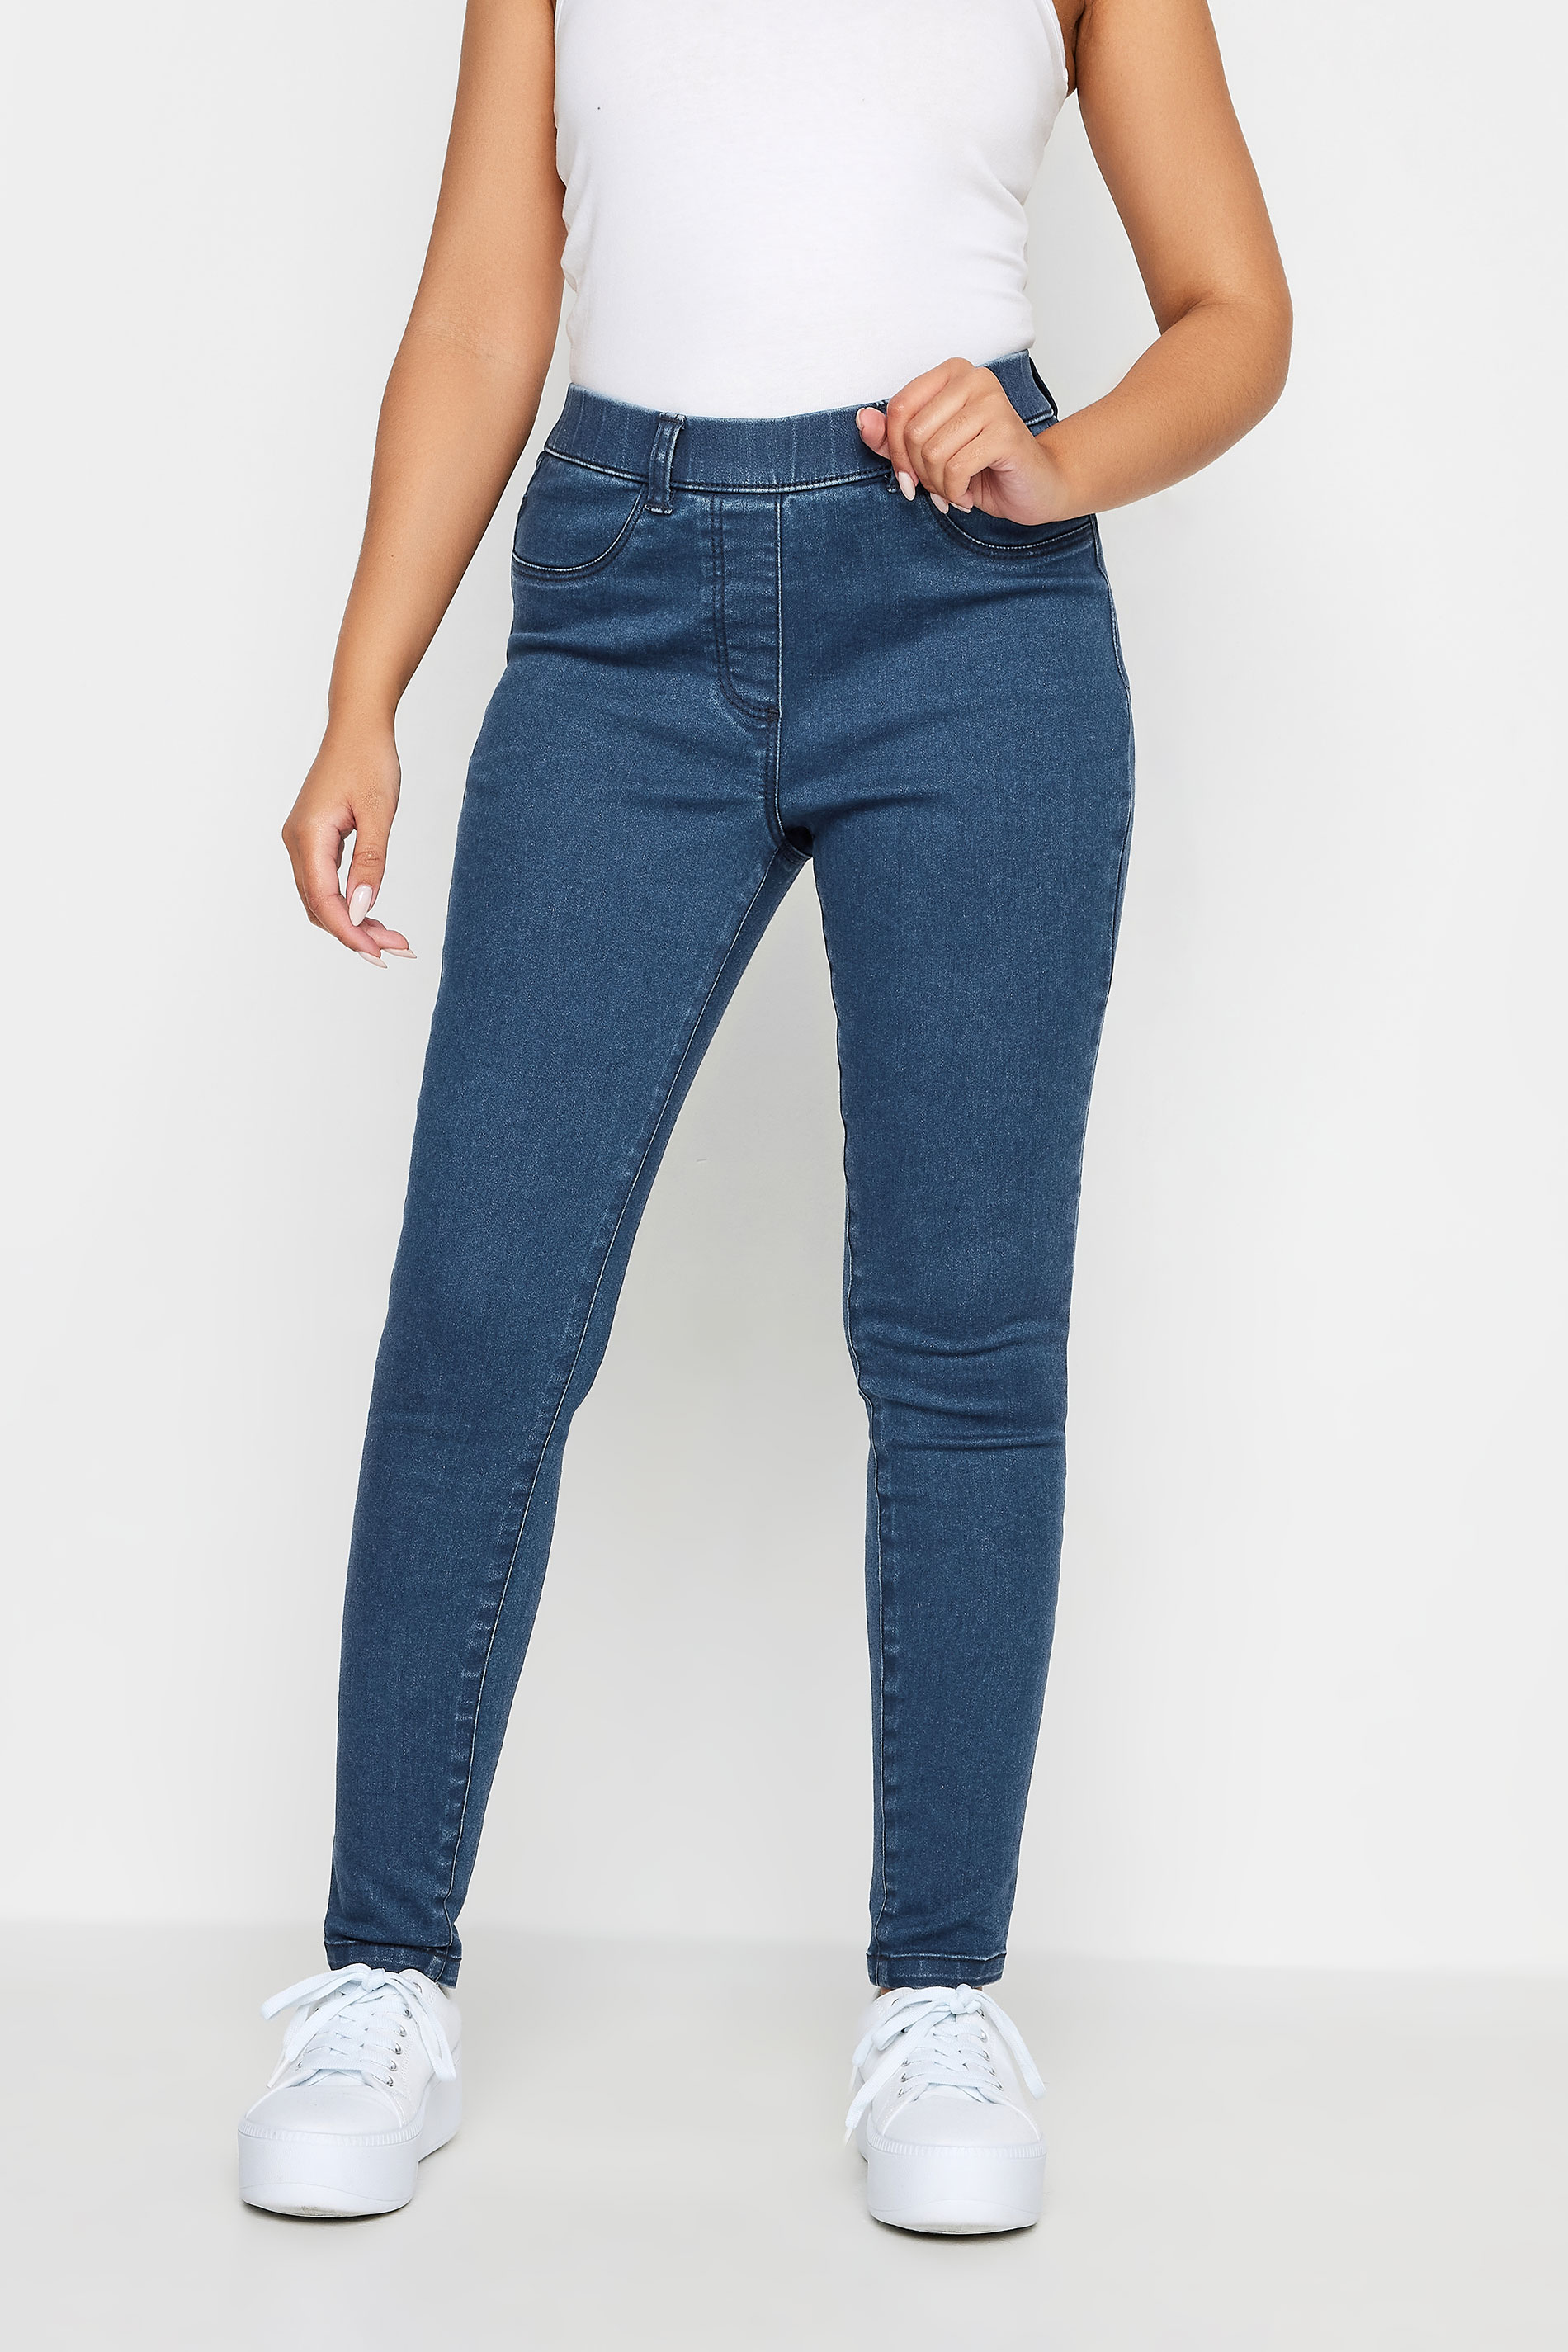 M&Co Blue Mid Wash Stretch Jeggings | M&Co 1